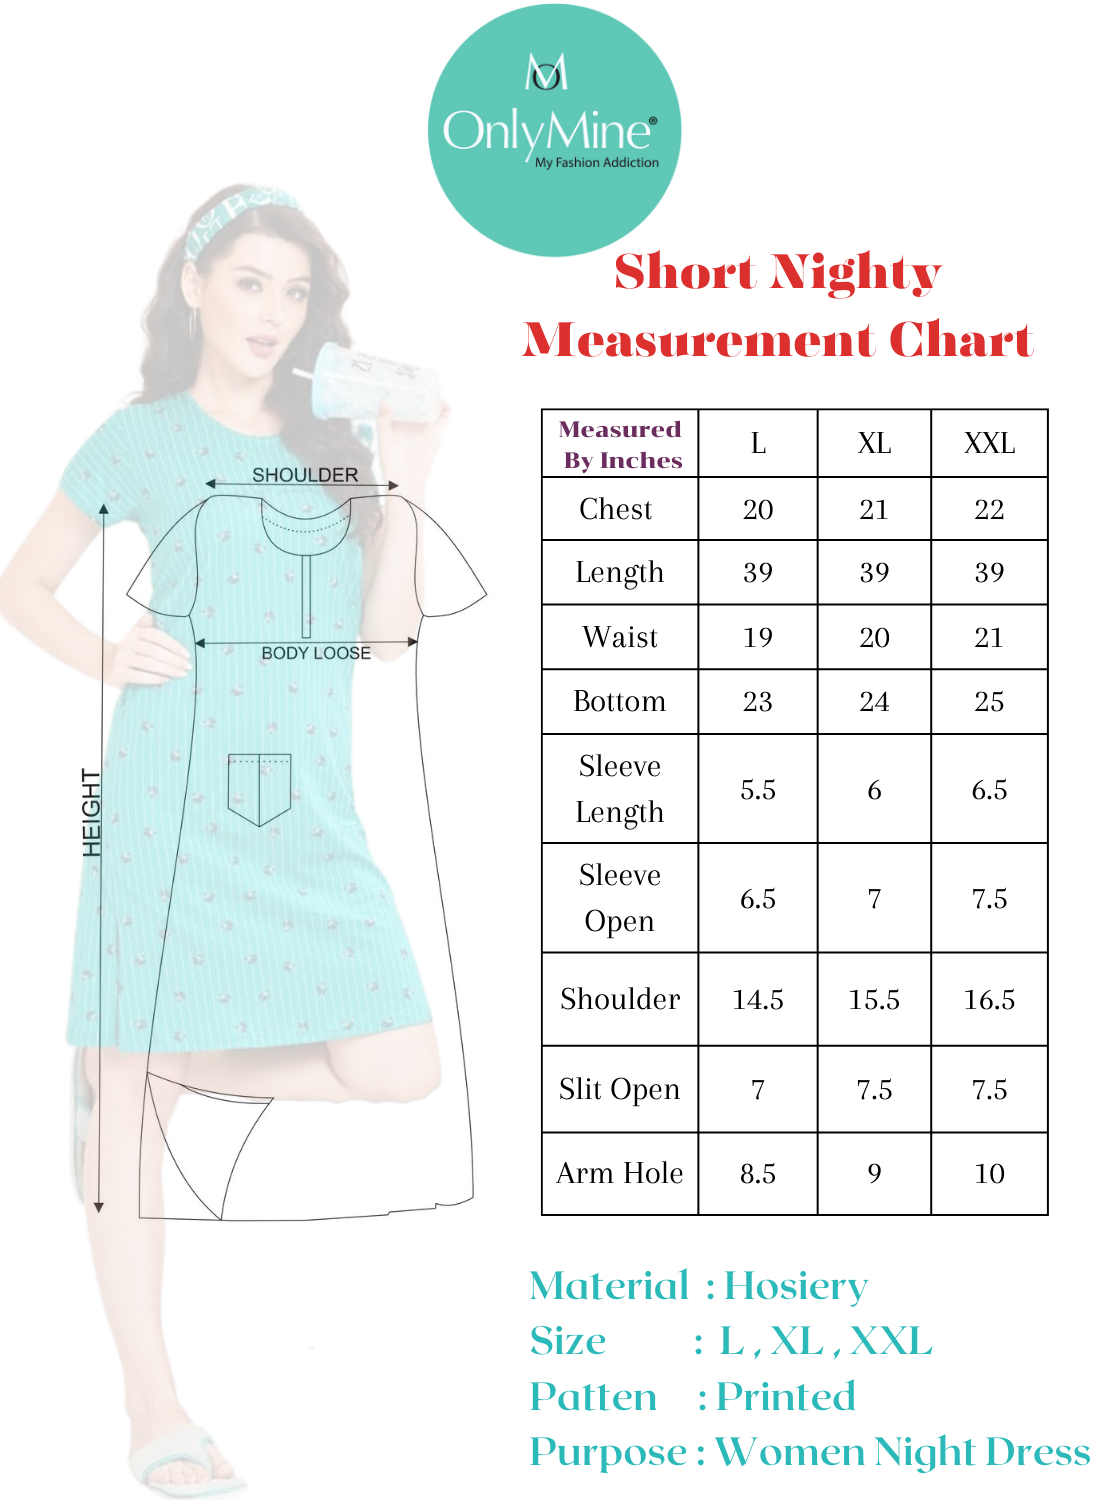 ONLY MINE Premium HOSIERY Short Nighty | Ankle Length | Prettiest Collection's for Stylish Women's